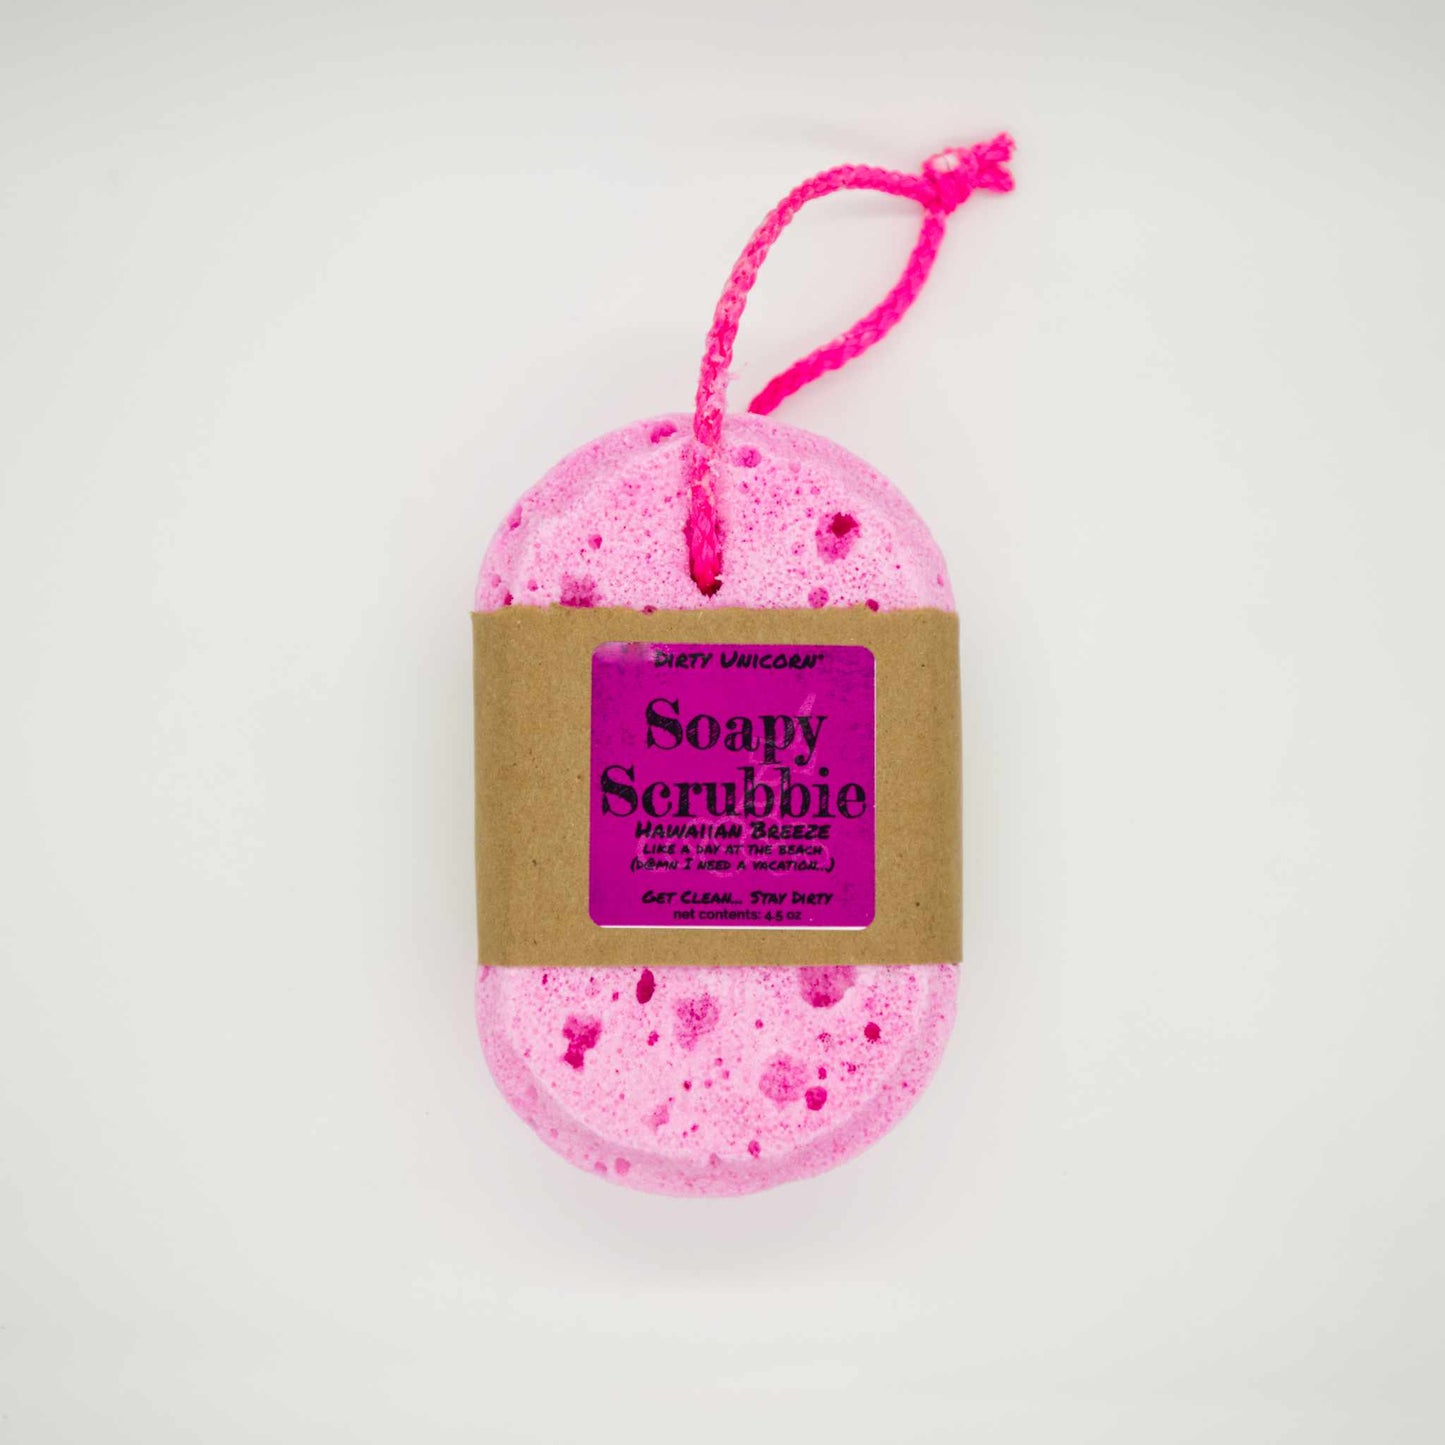 bright pink bath sponge with pink rope for hanging on blank white background. Sponge is wrapped in brown Kraft paper belly band with a pink label barring product title